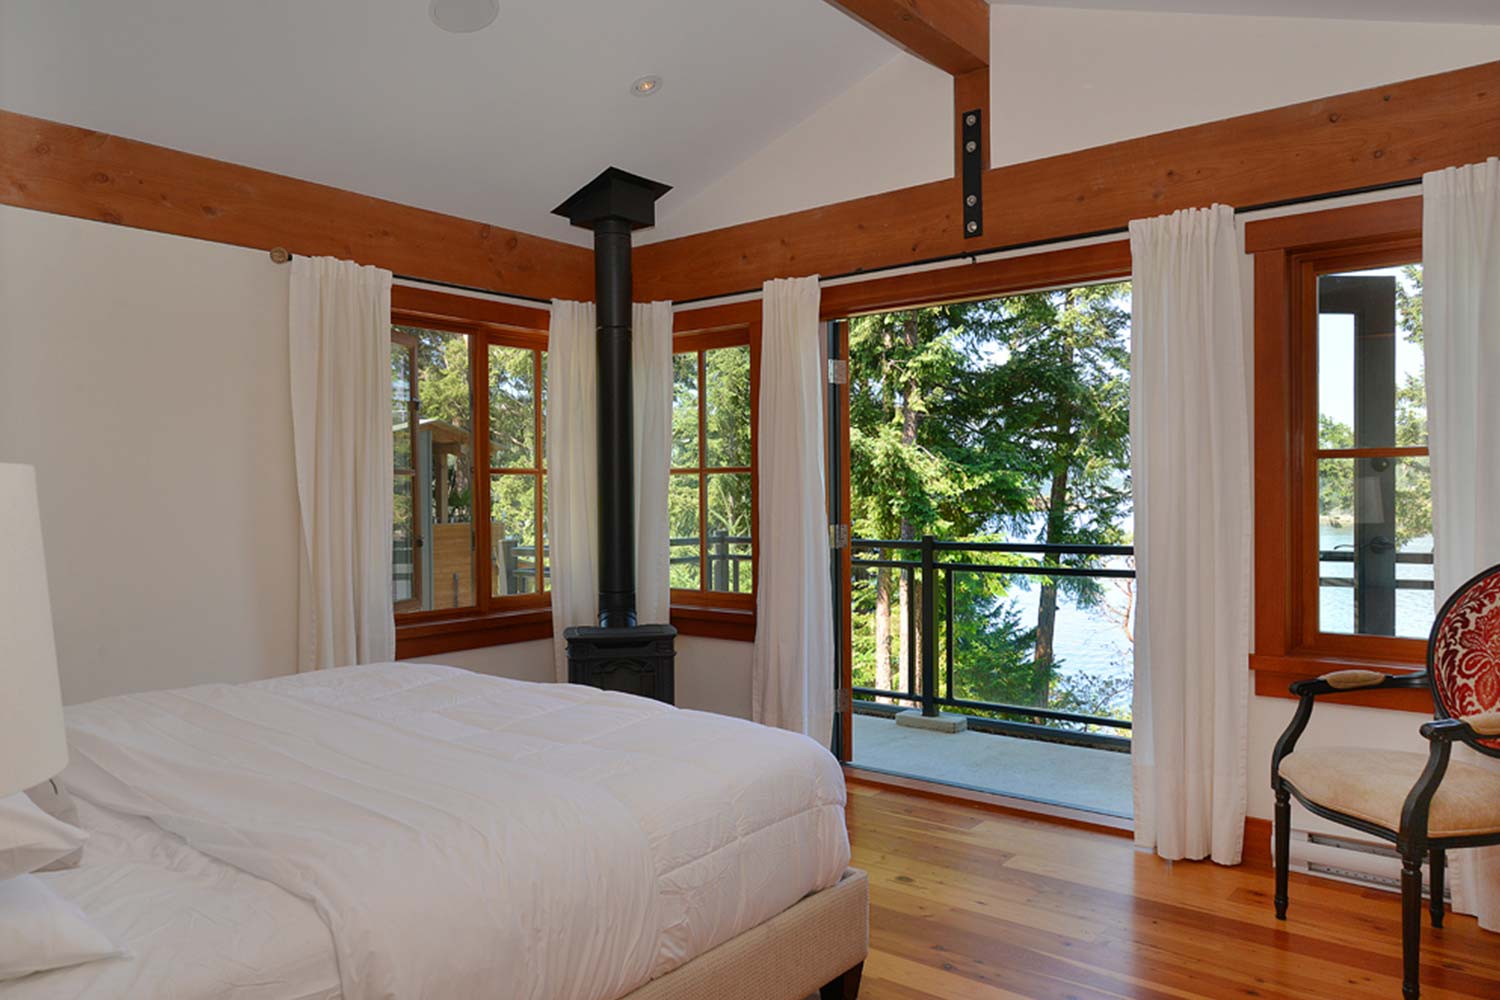 The upstairs master bedroom of this luxury holiday house features a private balcony with ocean views & a walk-in closet.